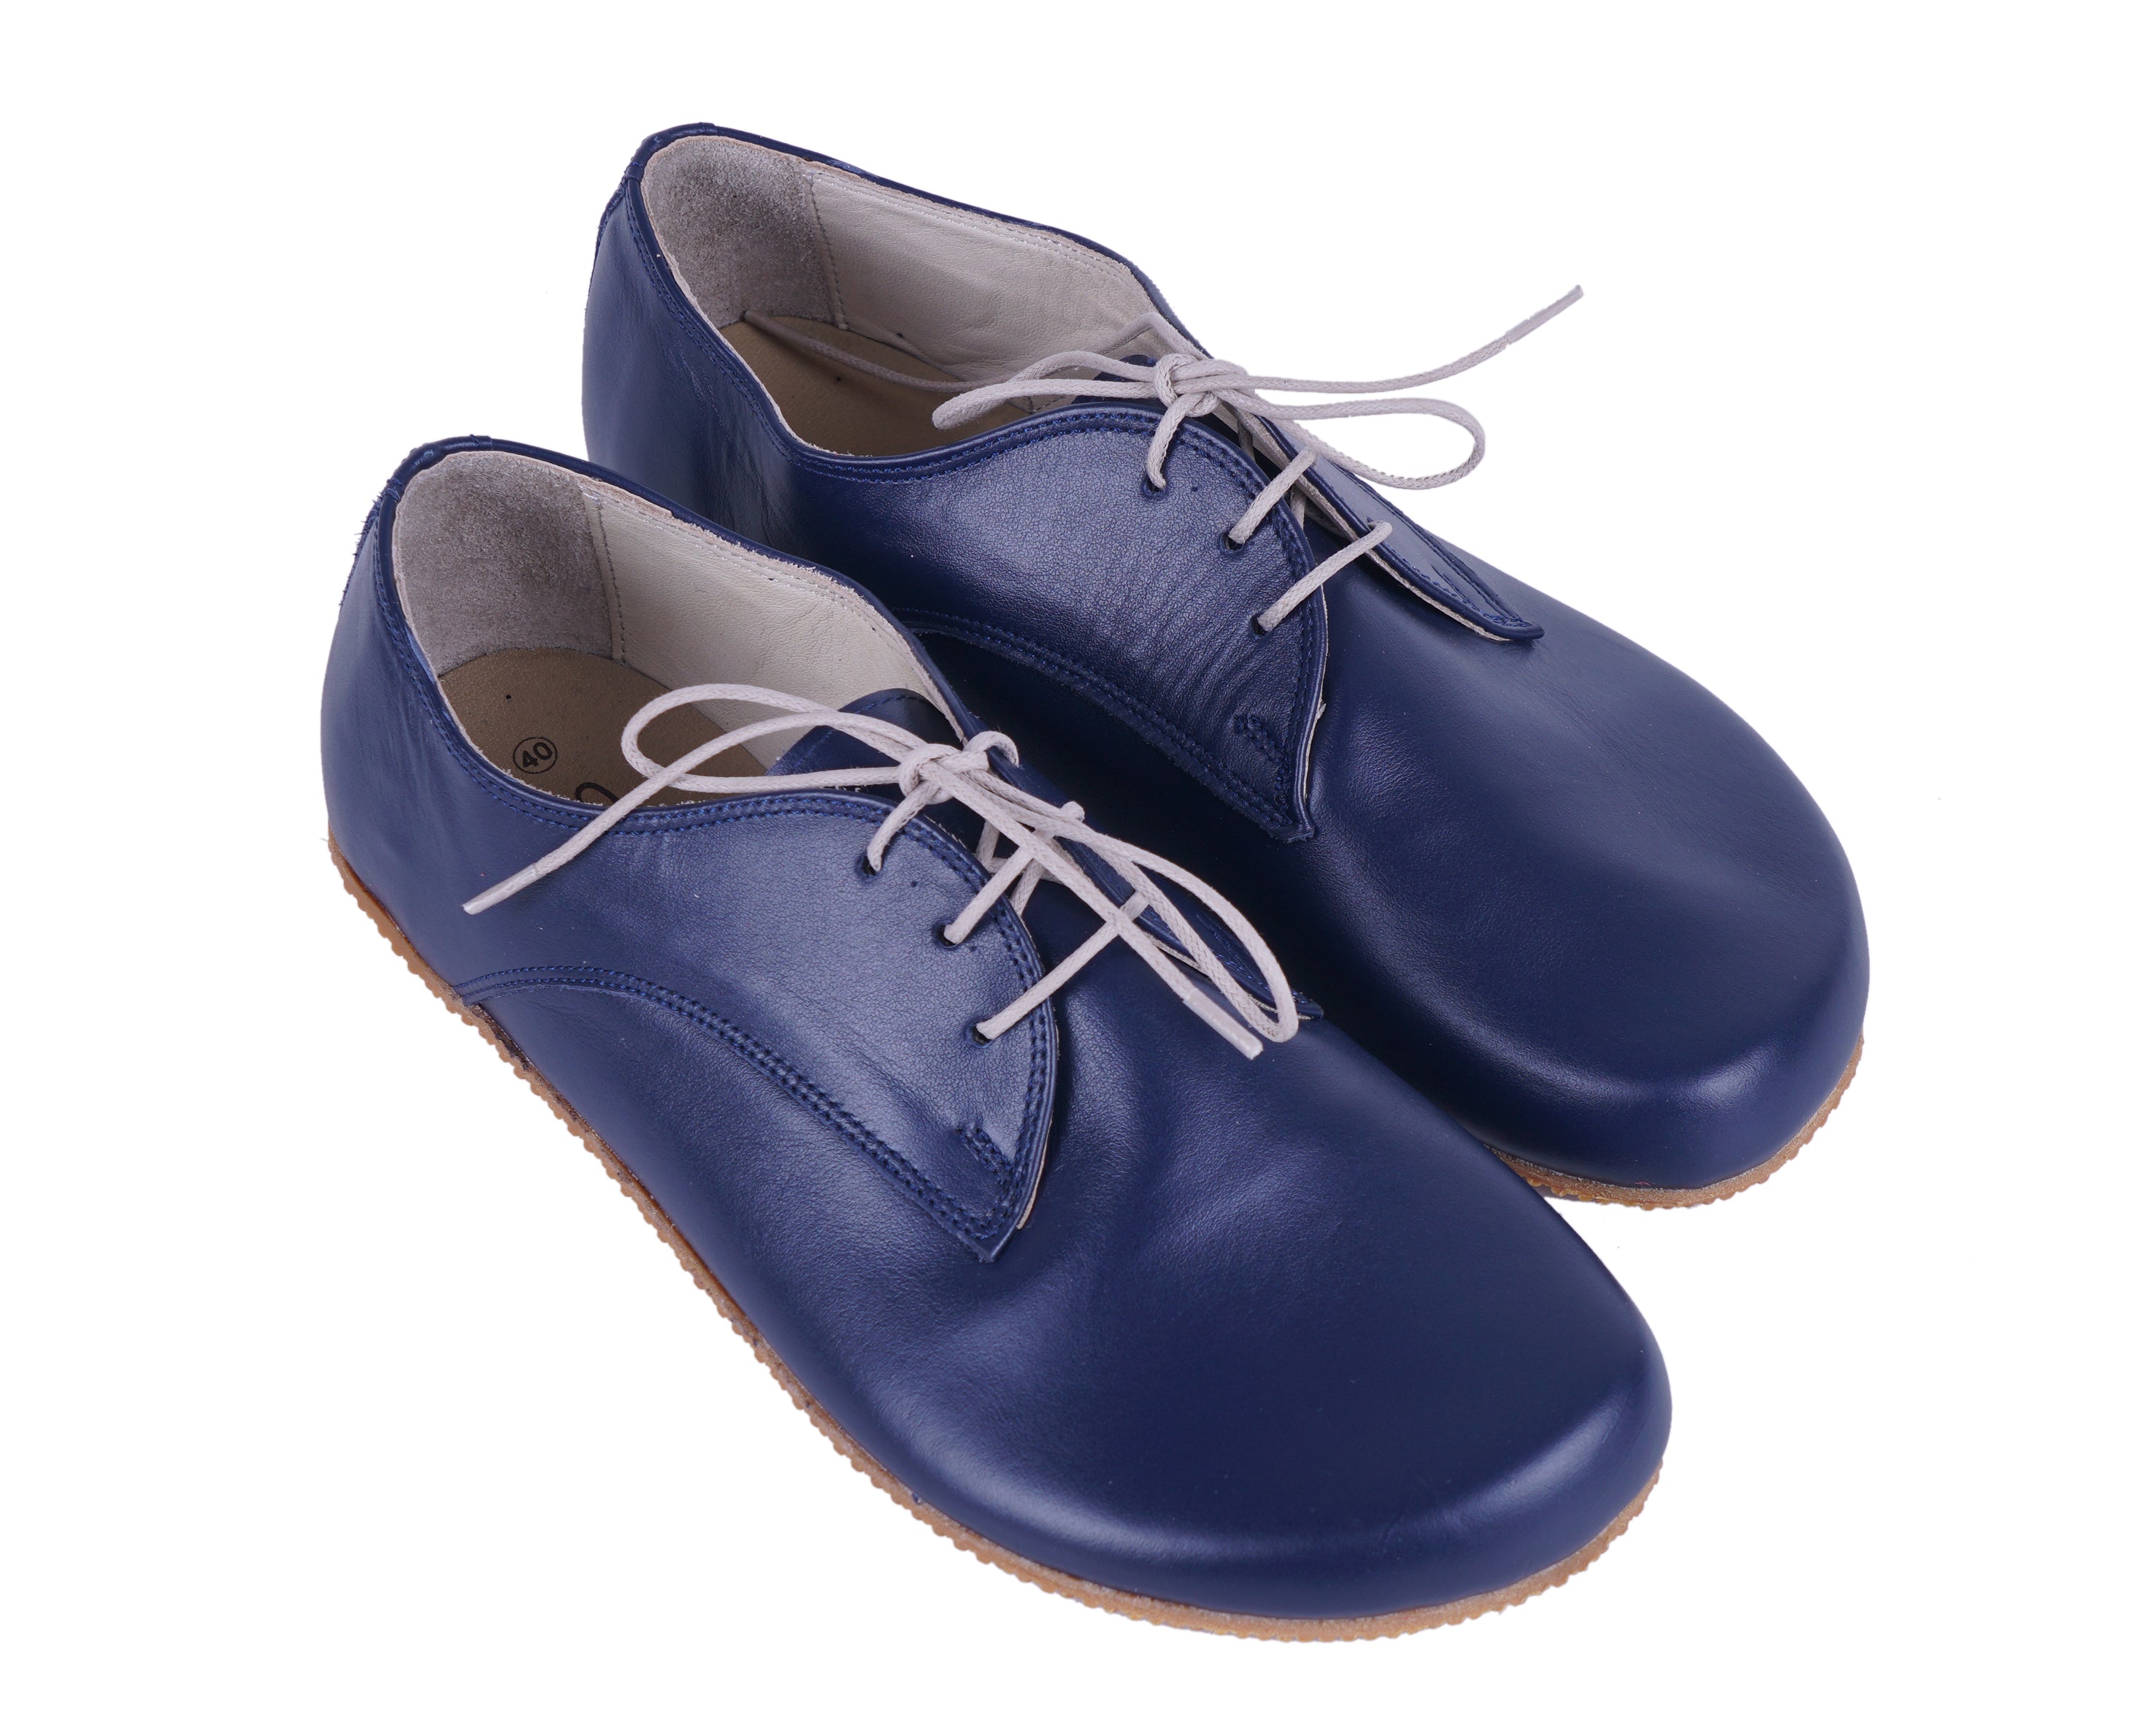 Navy Blue Oxford Wide Barefoot Shoes Smooth Leather Handmade 4mm Rubber Outsole